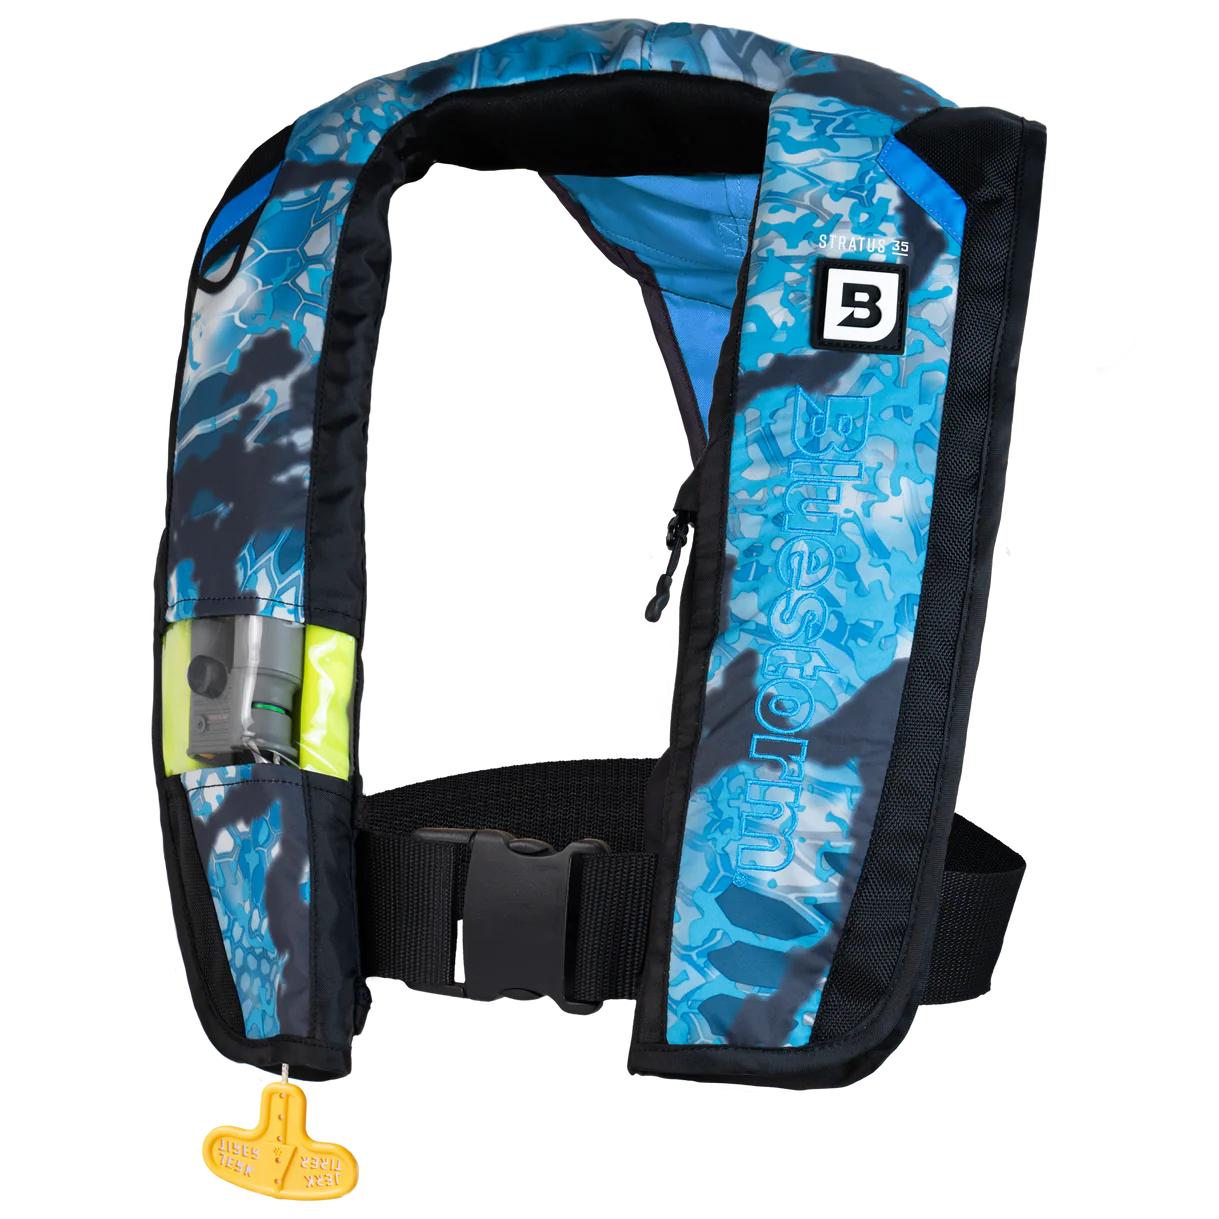 Bluestorm Stratus A/M-35 Automatic/Manual Inflatable Life Jacket - USCG Approved